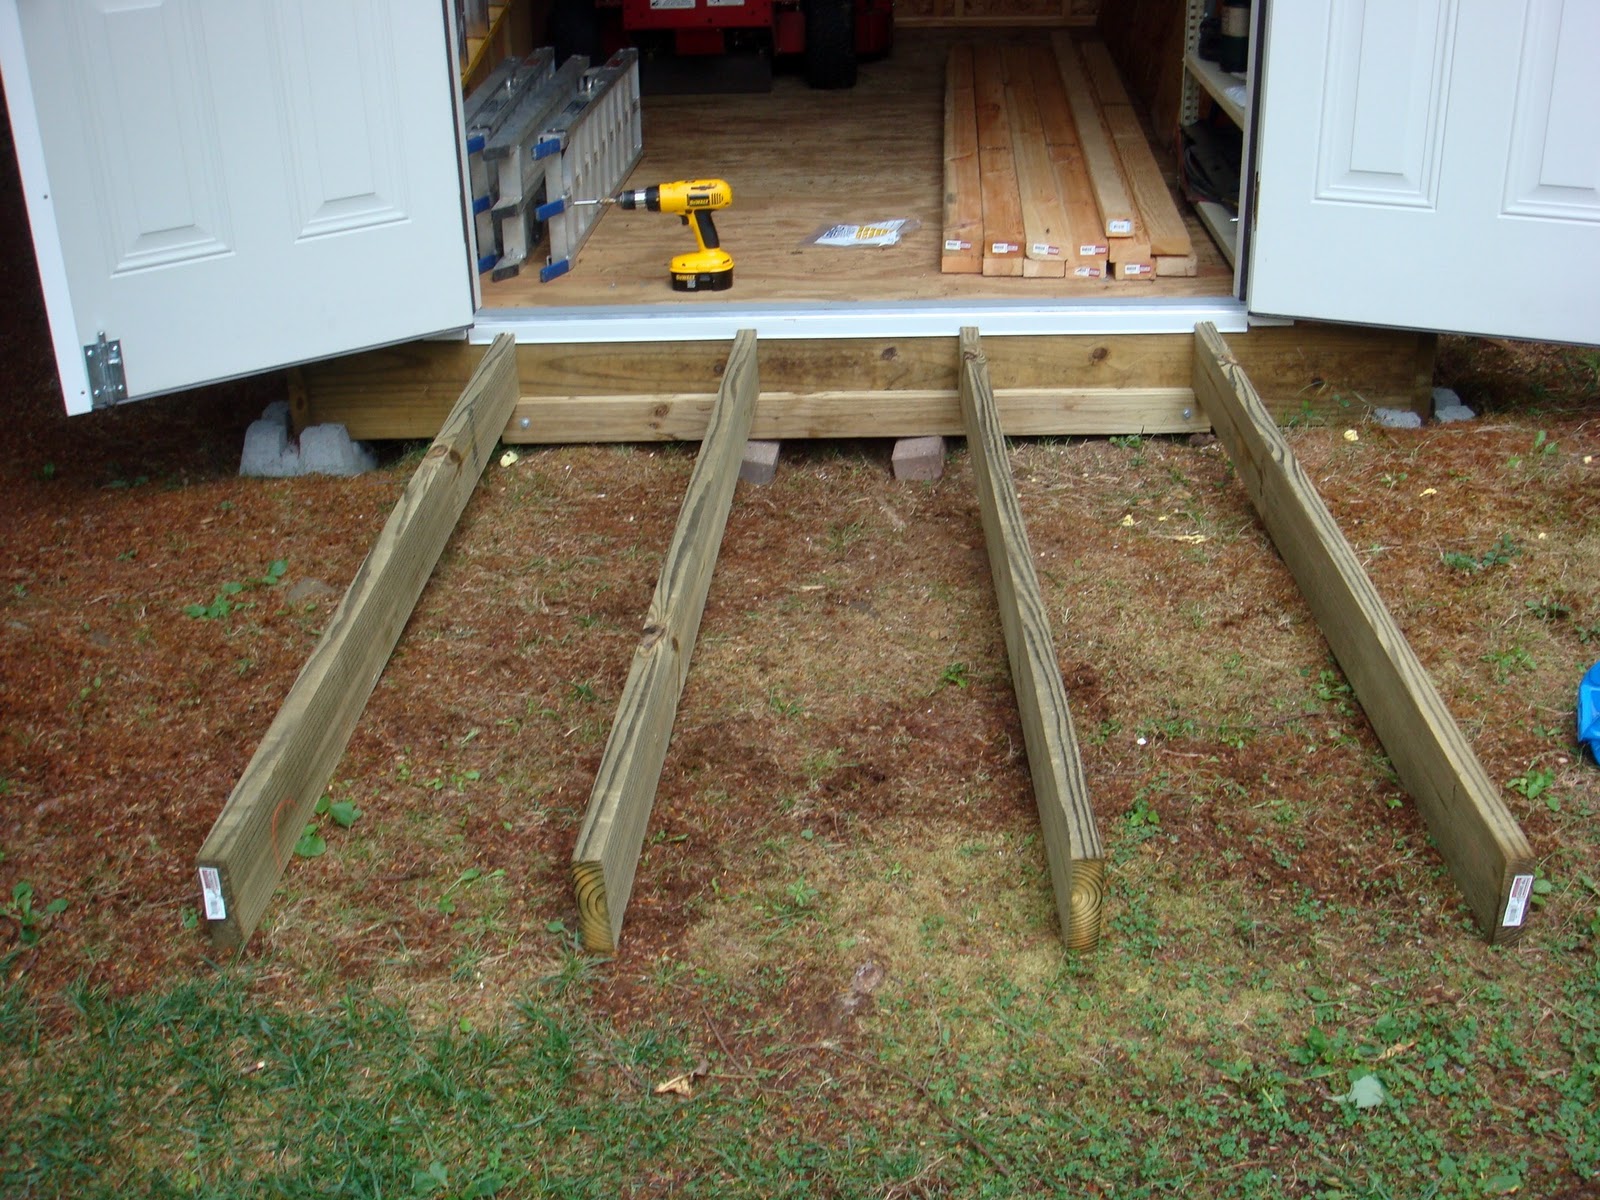 Garden shed plans porch, woodwork plans, how to build a ramp into my shed